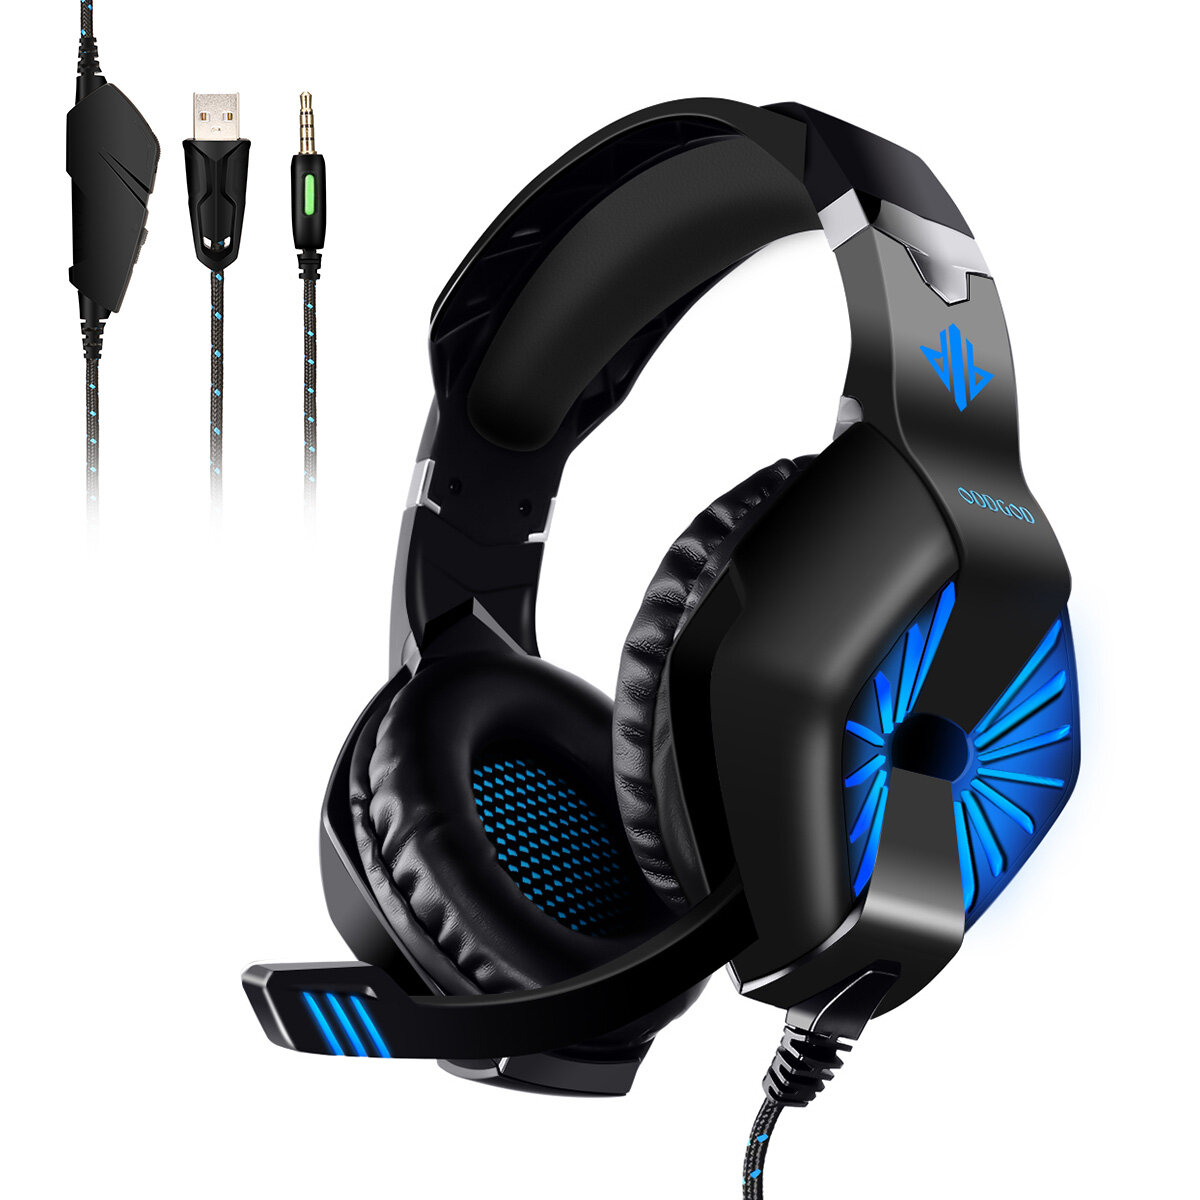 ELEGIANT A3 3.5mm Gaming Headset Mic Headphones LED 3D Stereo Bass Surround Sound Headphone for PC